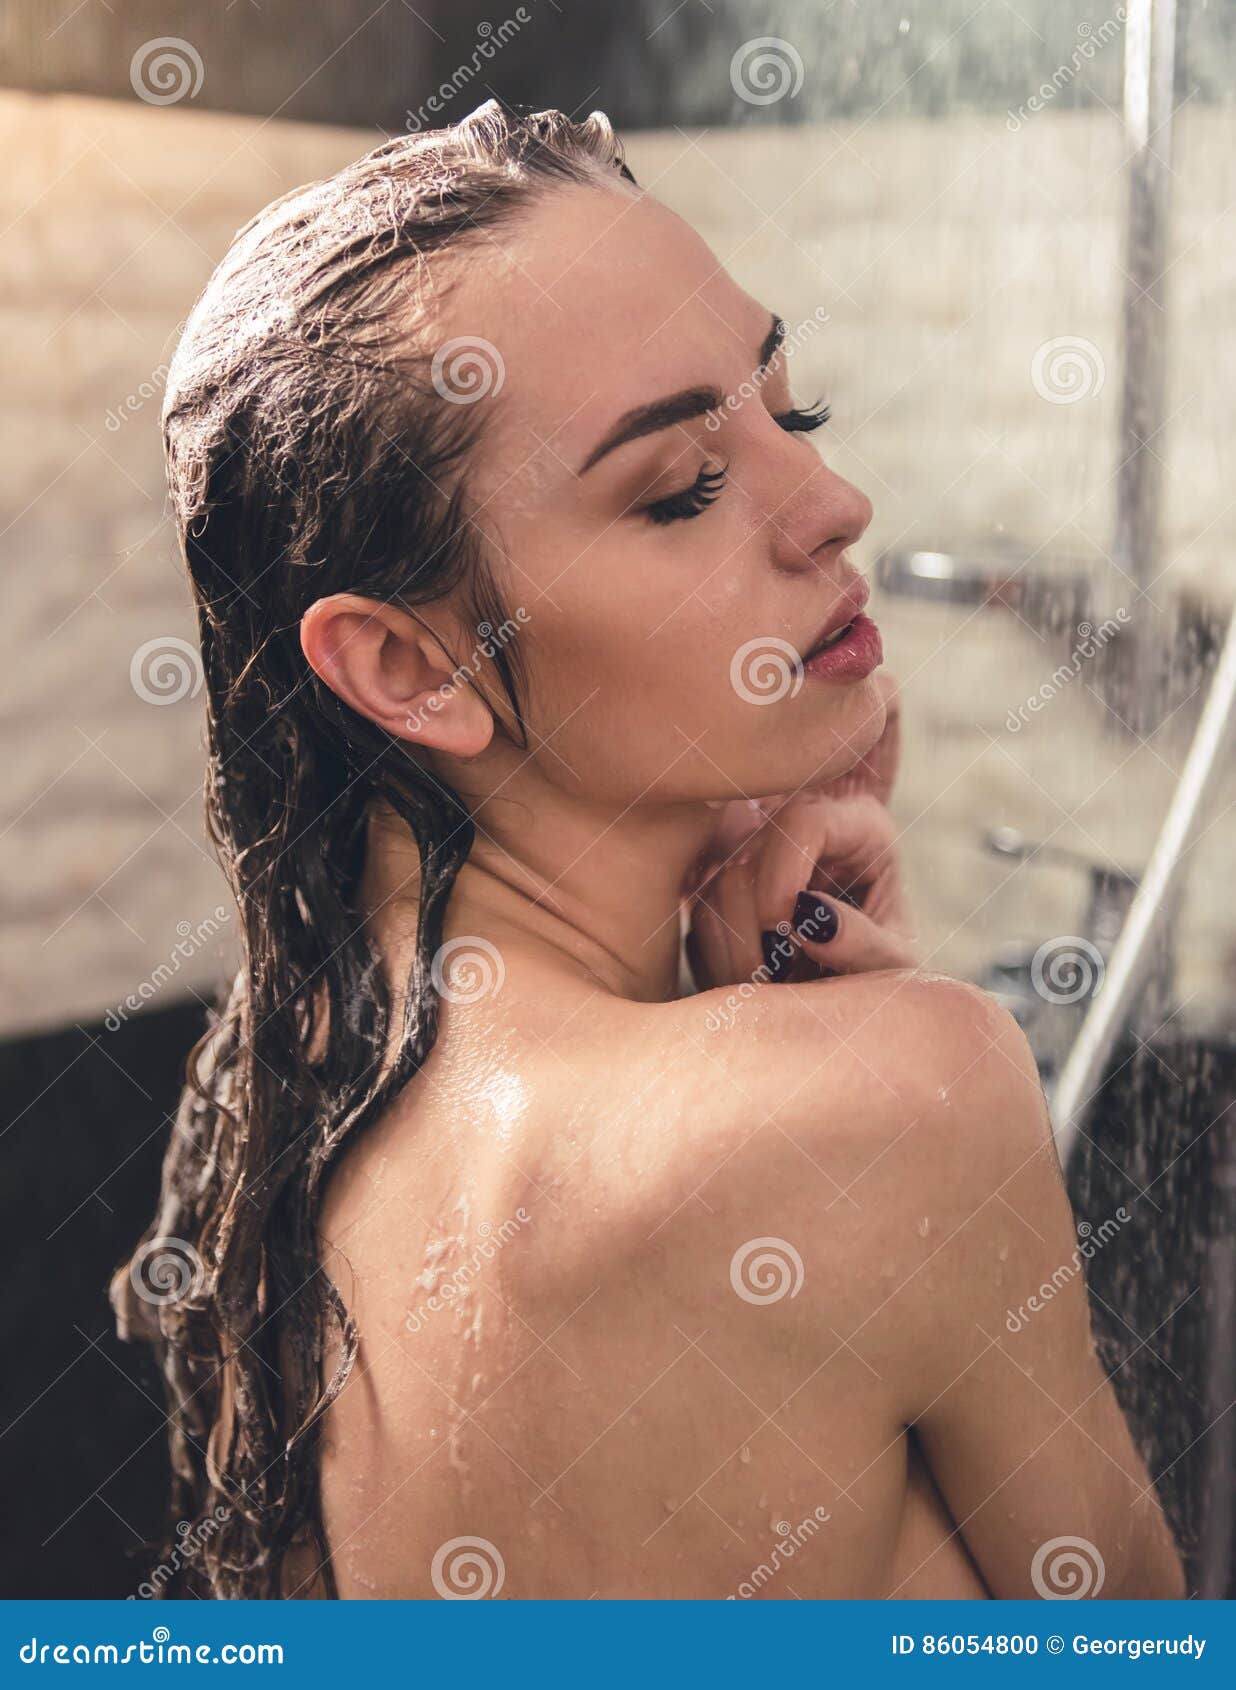 pictures of girls in the shower